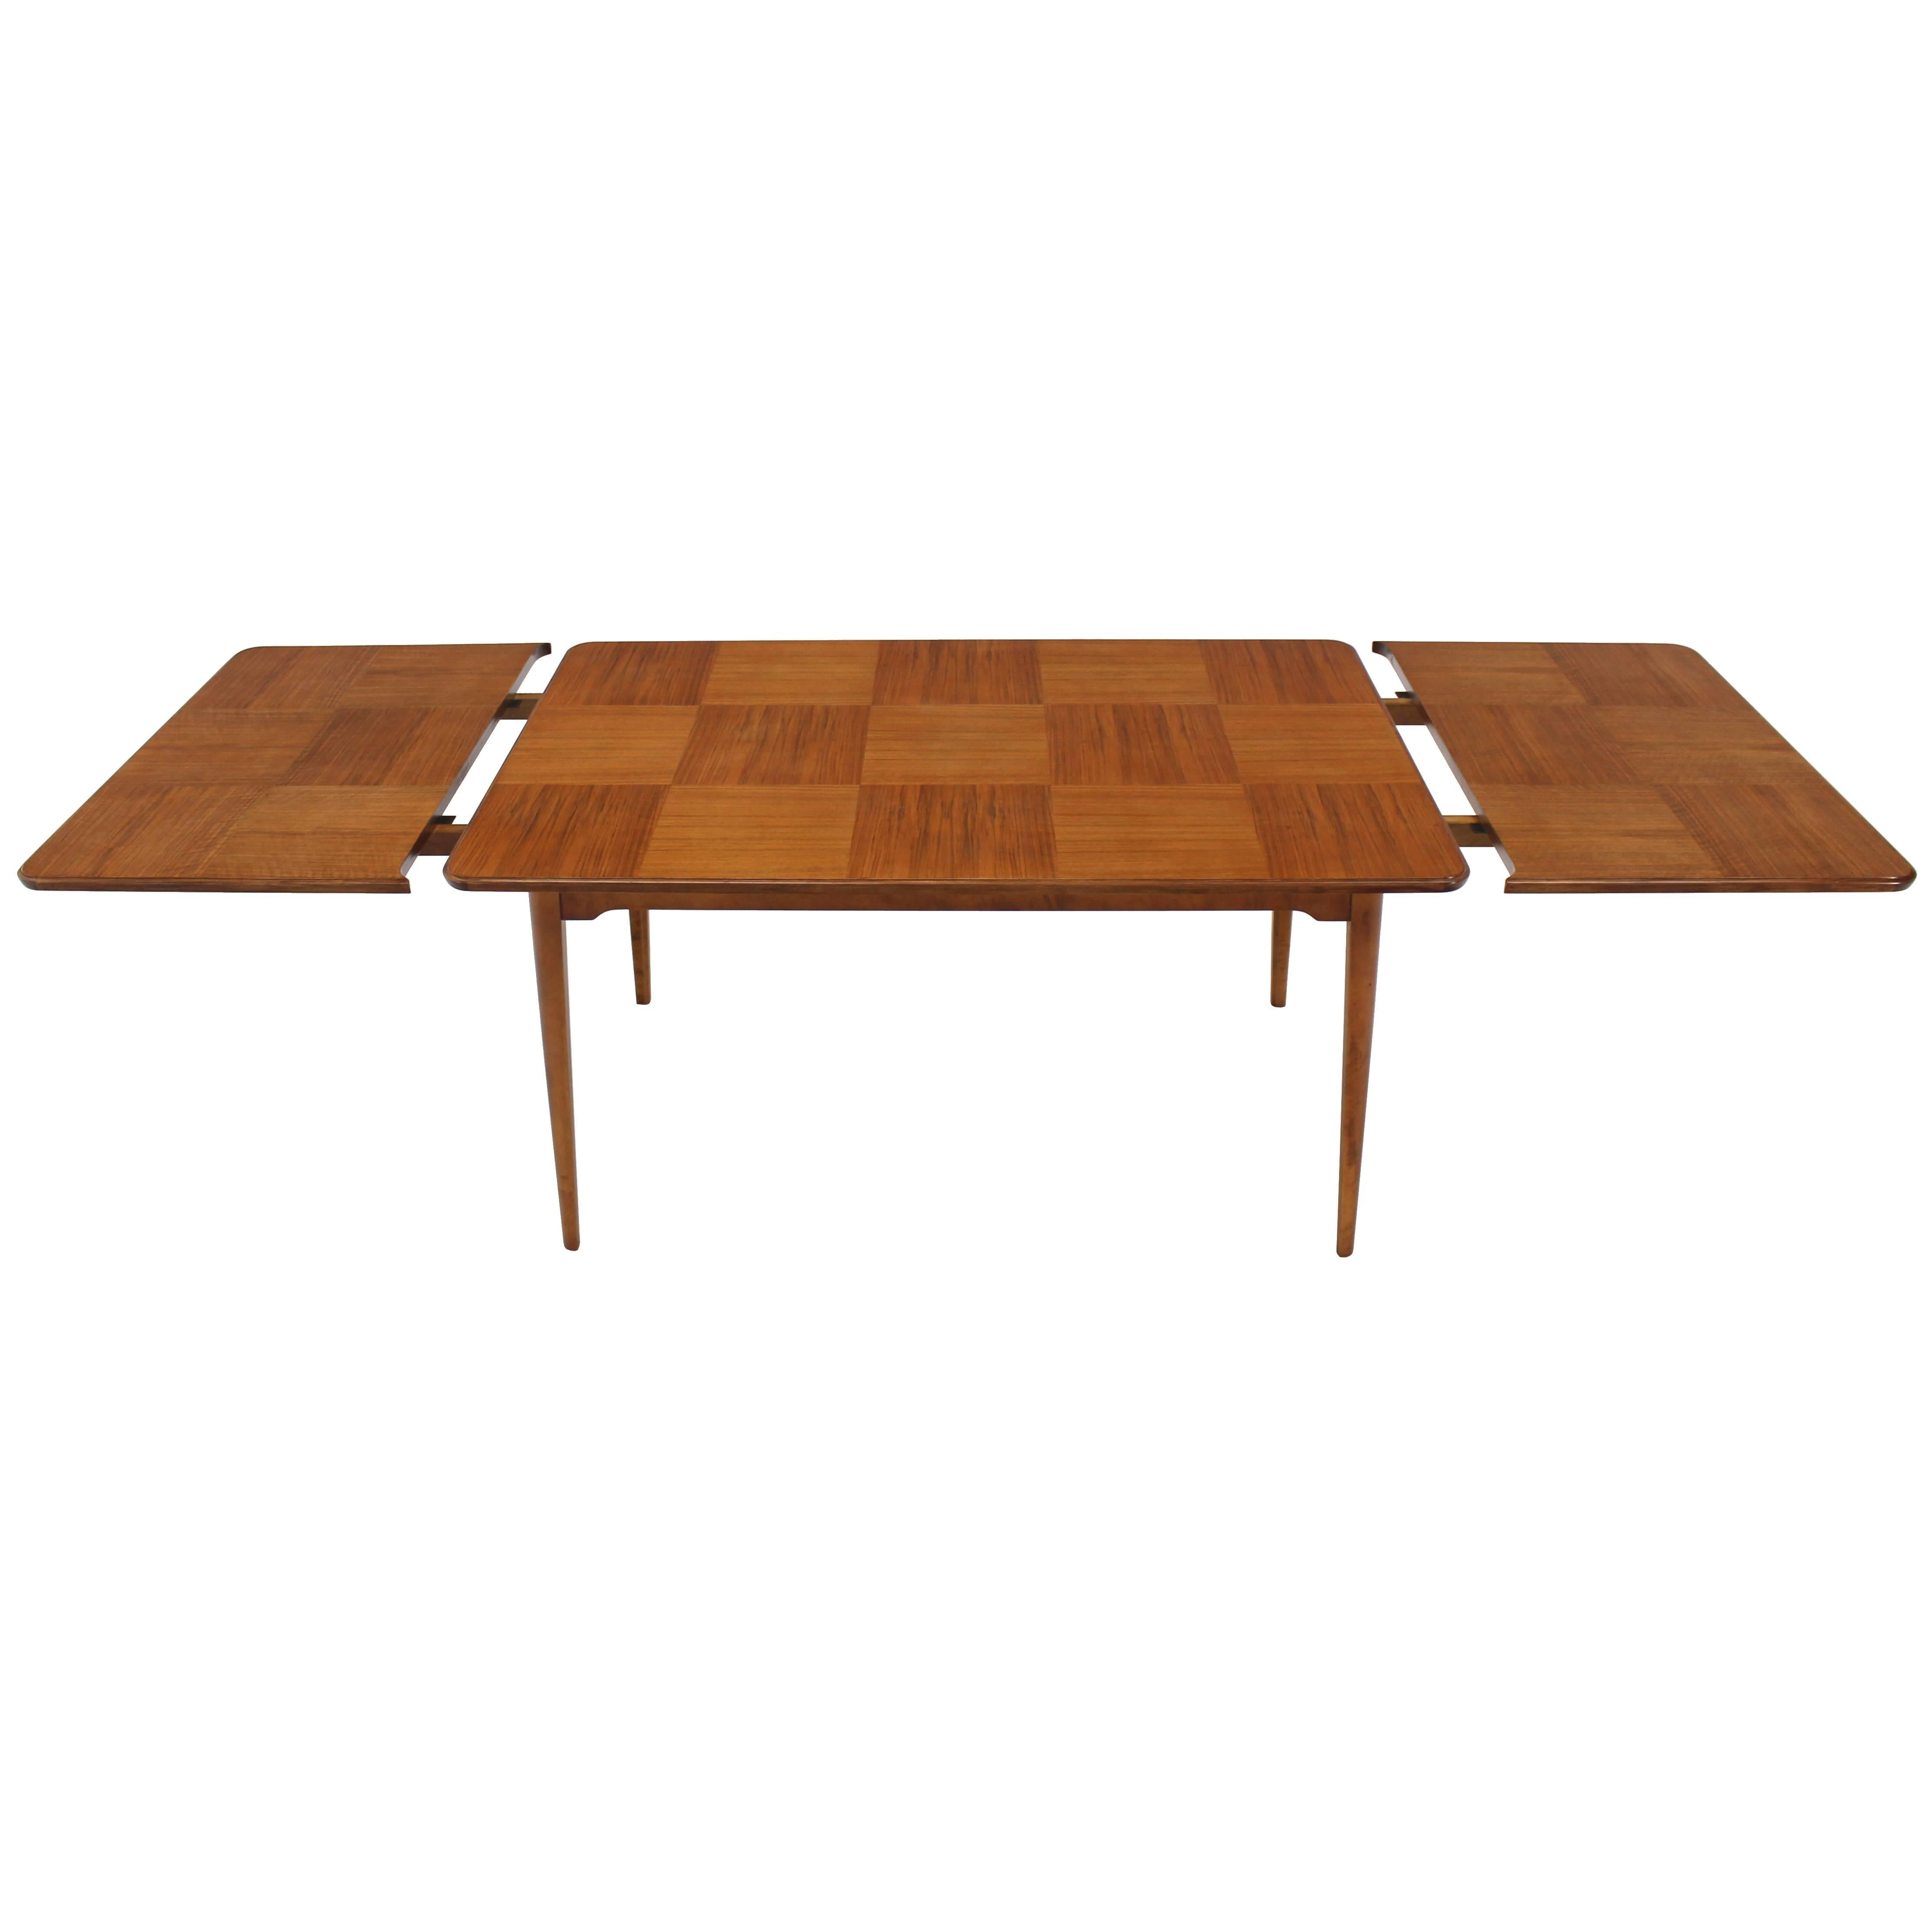 Rare Edmund Spence Checker Pattern Dining Table For Sale